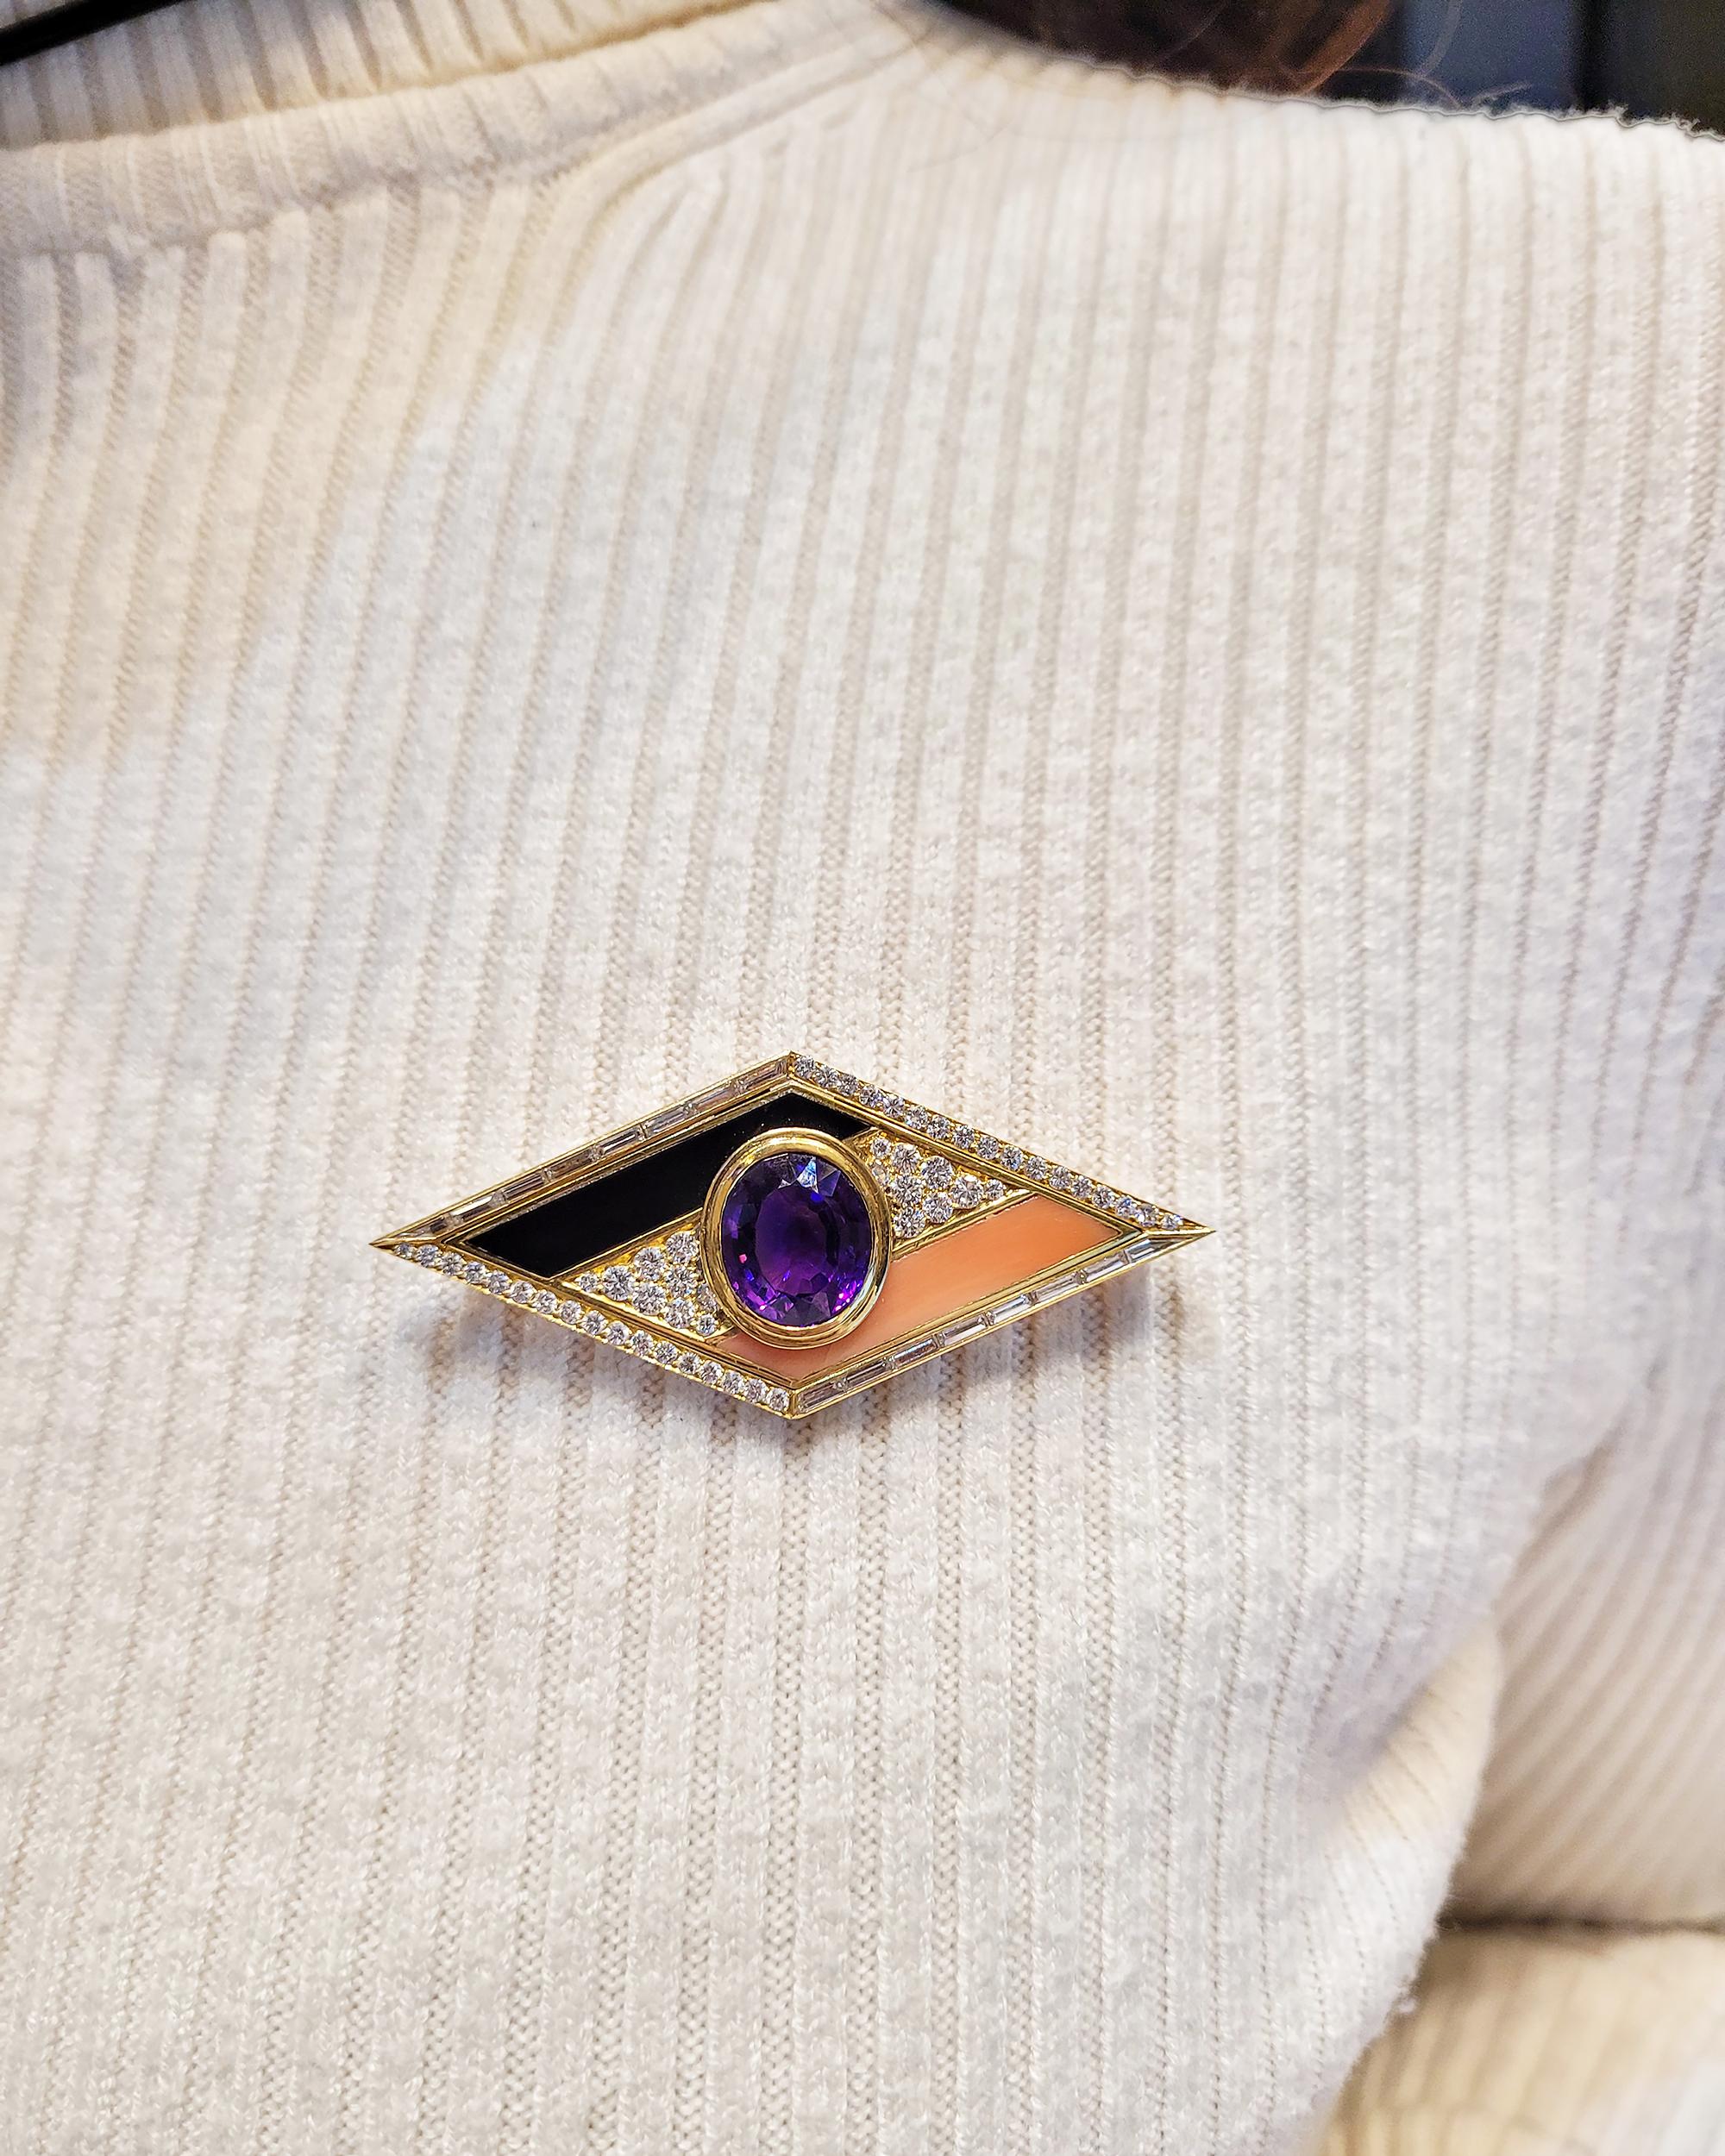 Enter the realm of exquisite craftsmanship with the Bvlgari Amethyst and Diamond Brooch - a masterpiece that seamlessly marries the allure of gemstones with the sophistication of fine jewelry. Crafted in the radiance of 18k yellow gold, this brooch